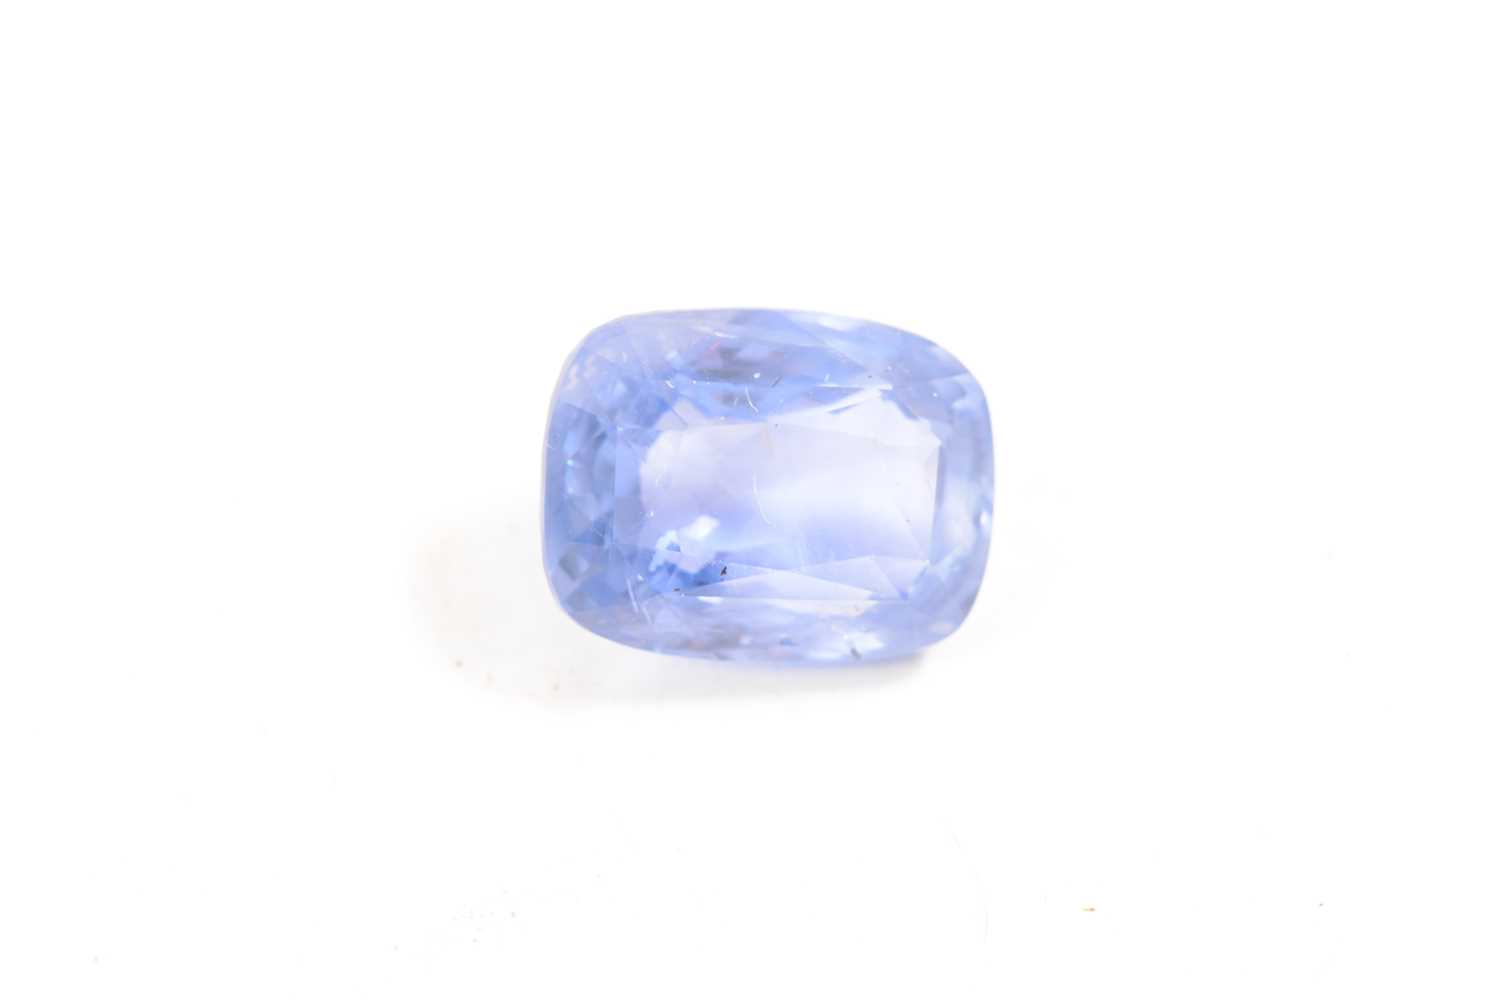 A loose blue sapphire stone - 12.25 carats. - Image 3 of 8